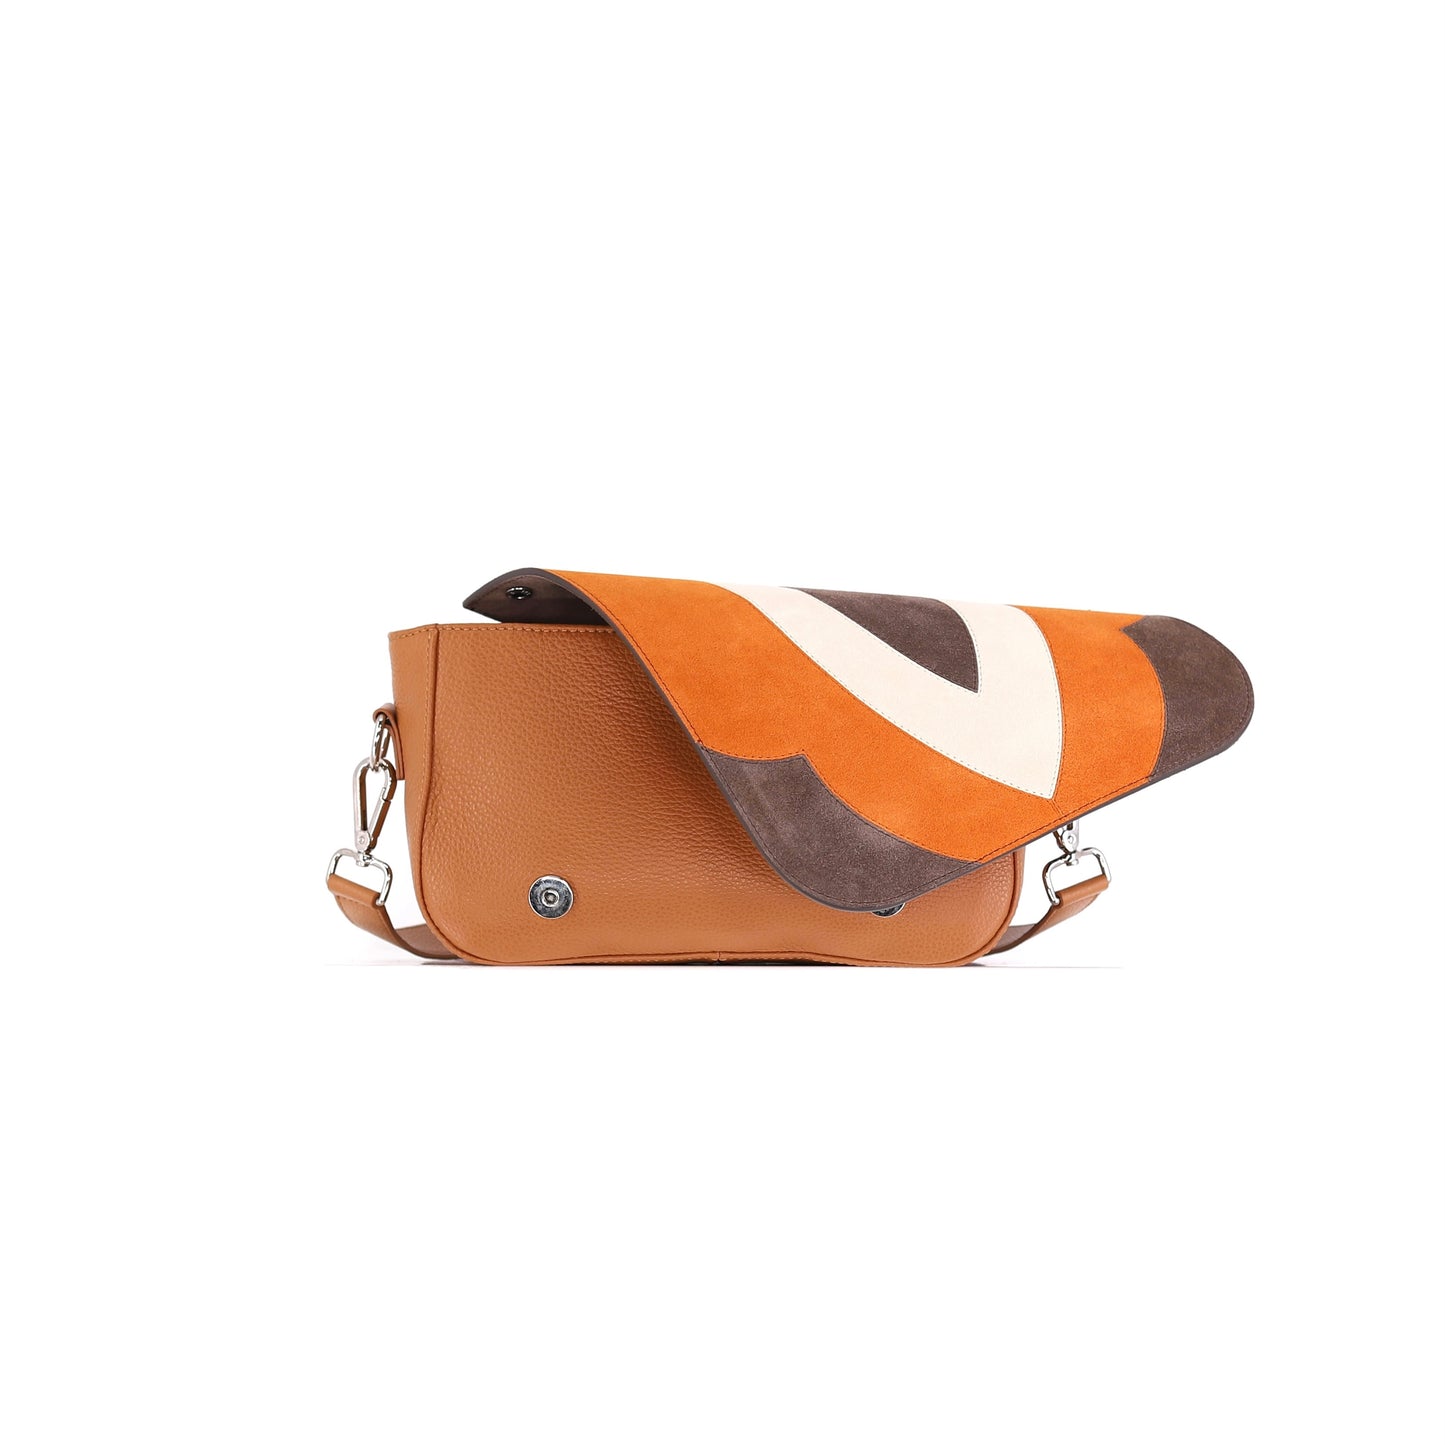 FREE SPIRIT flap suede leather orange brown small